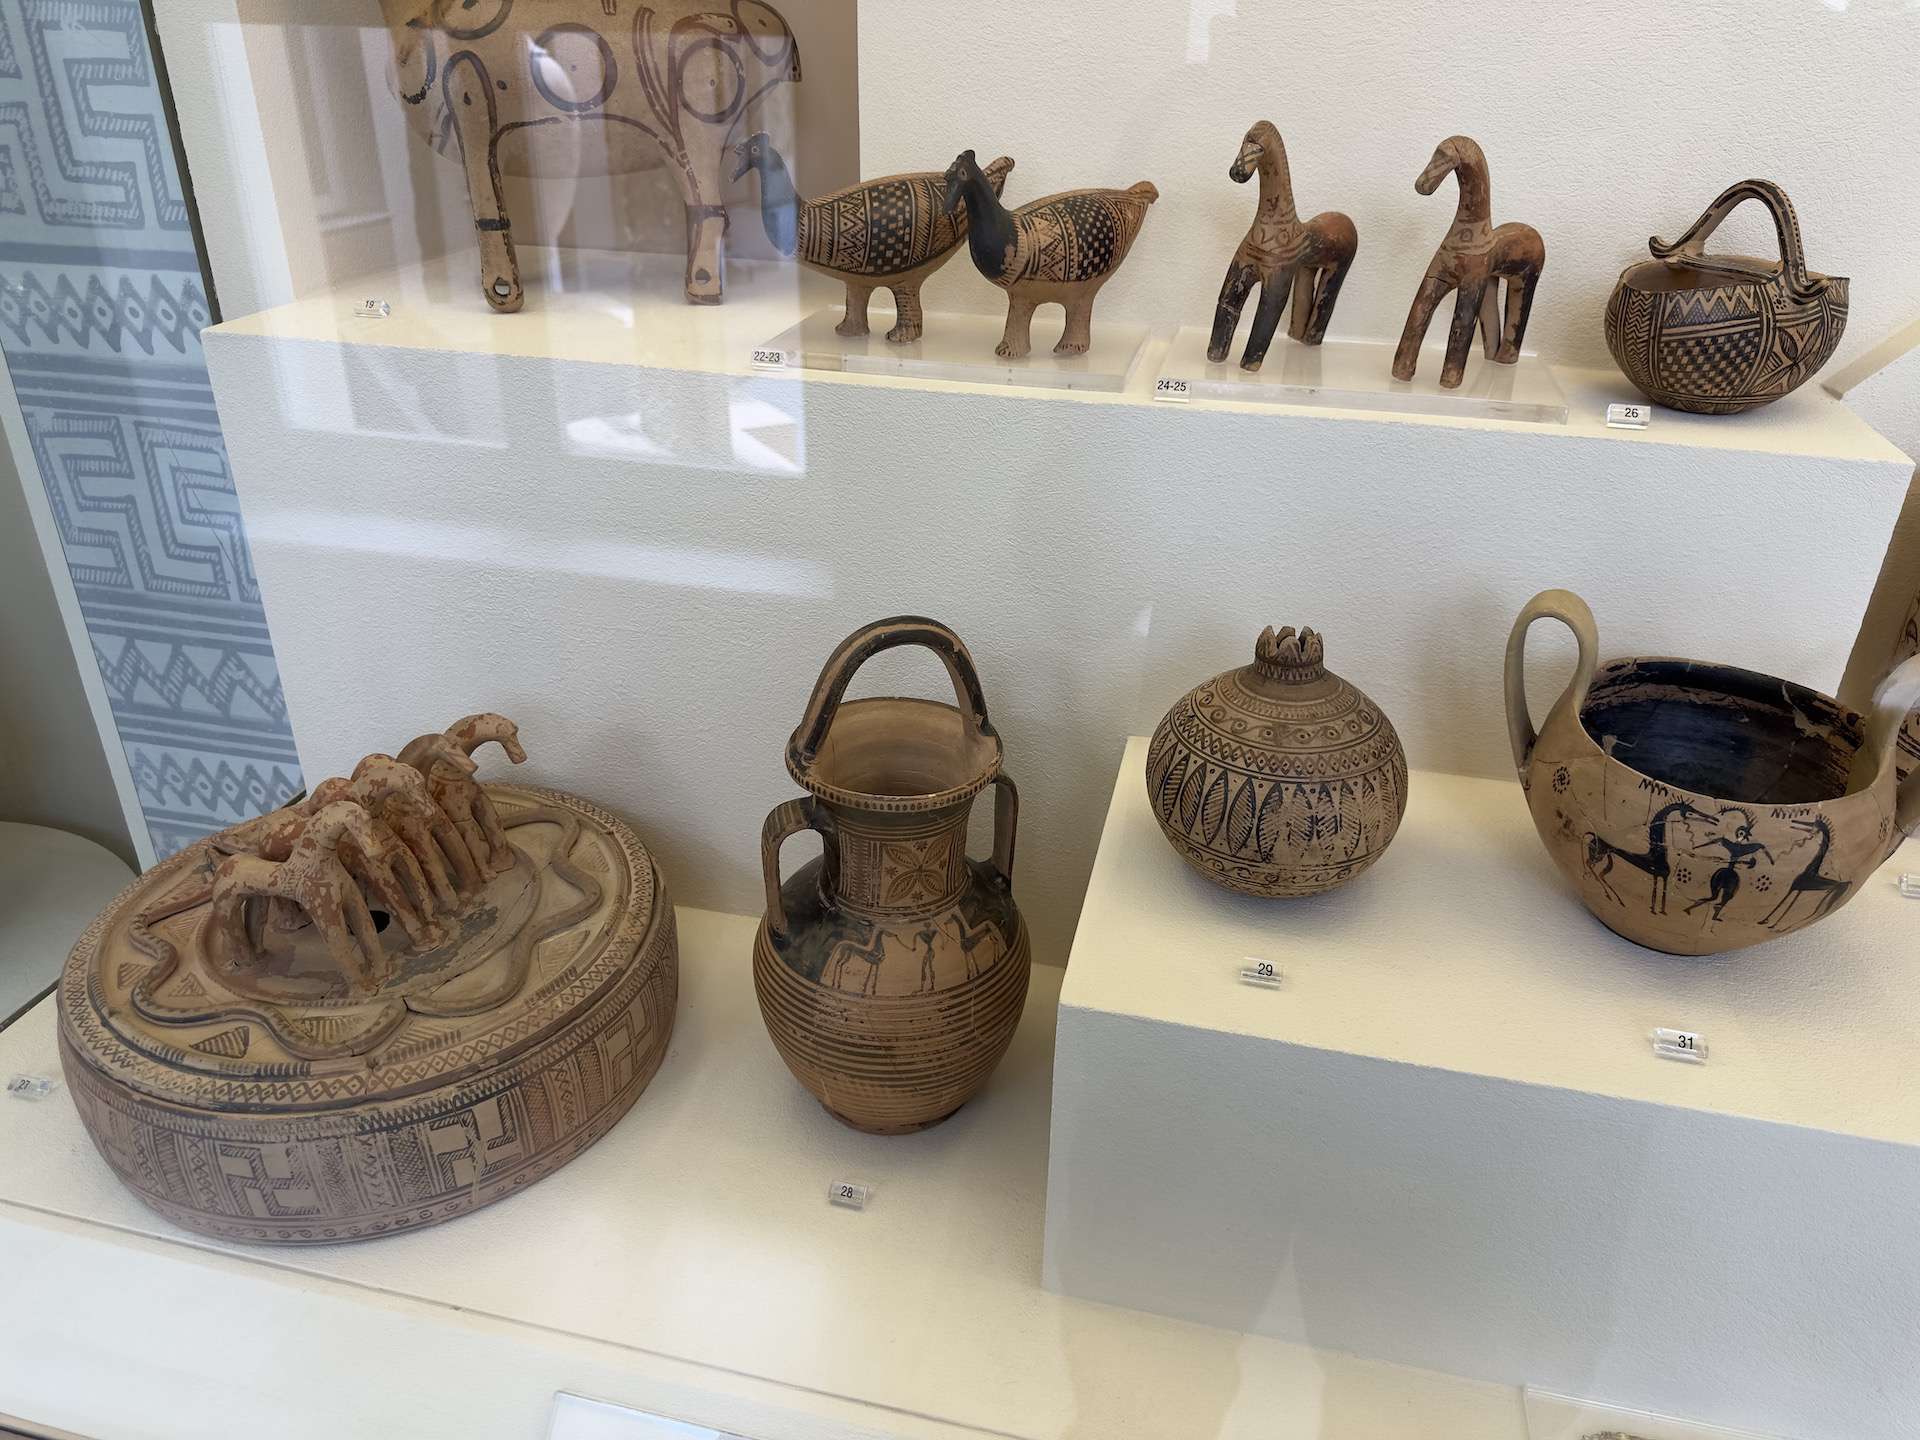 Child burial; 750-700 BC at the Kerameikos Museum in Athens, Greece